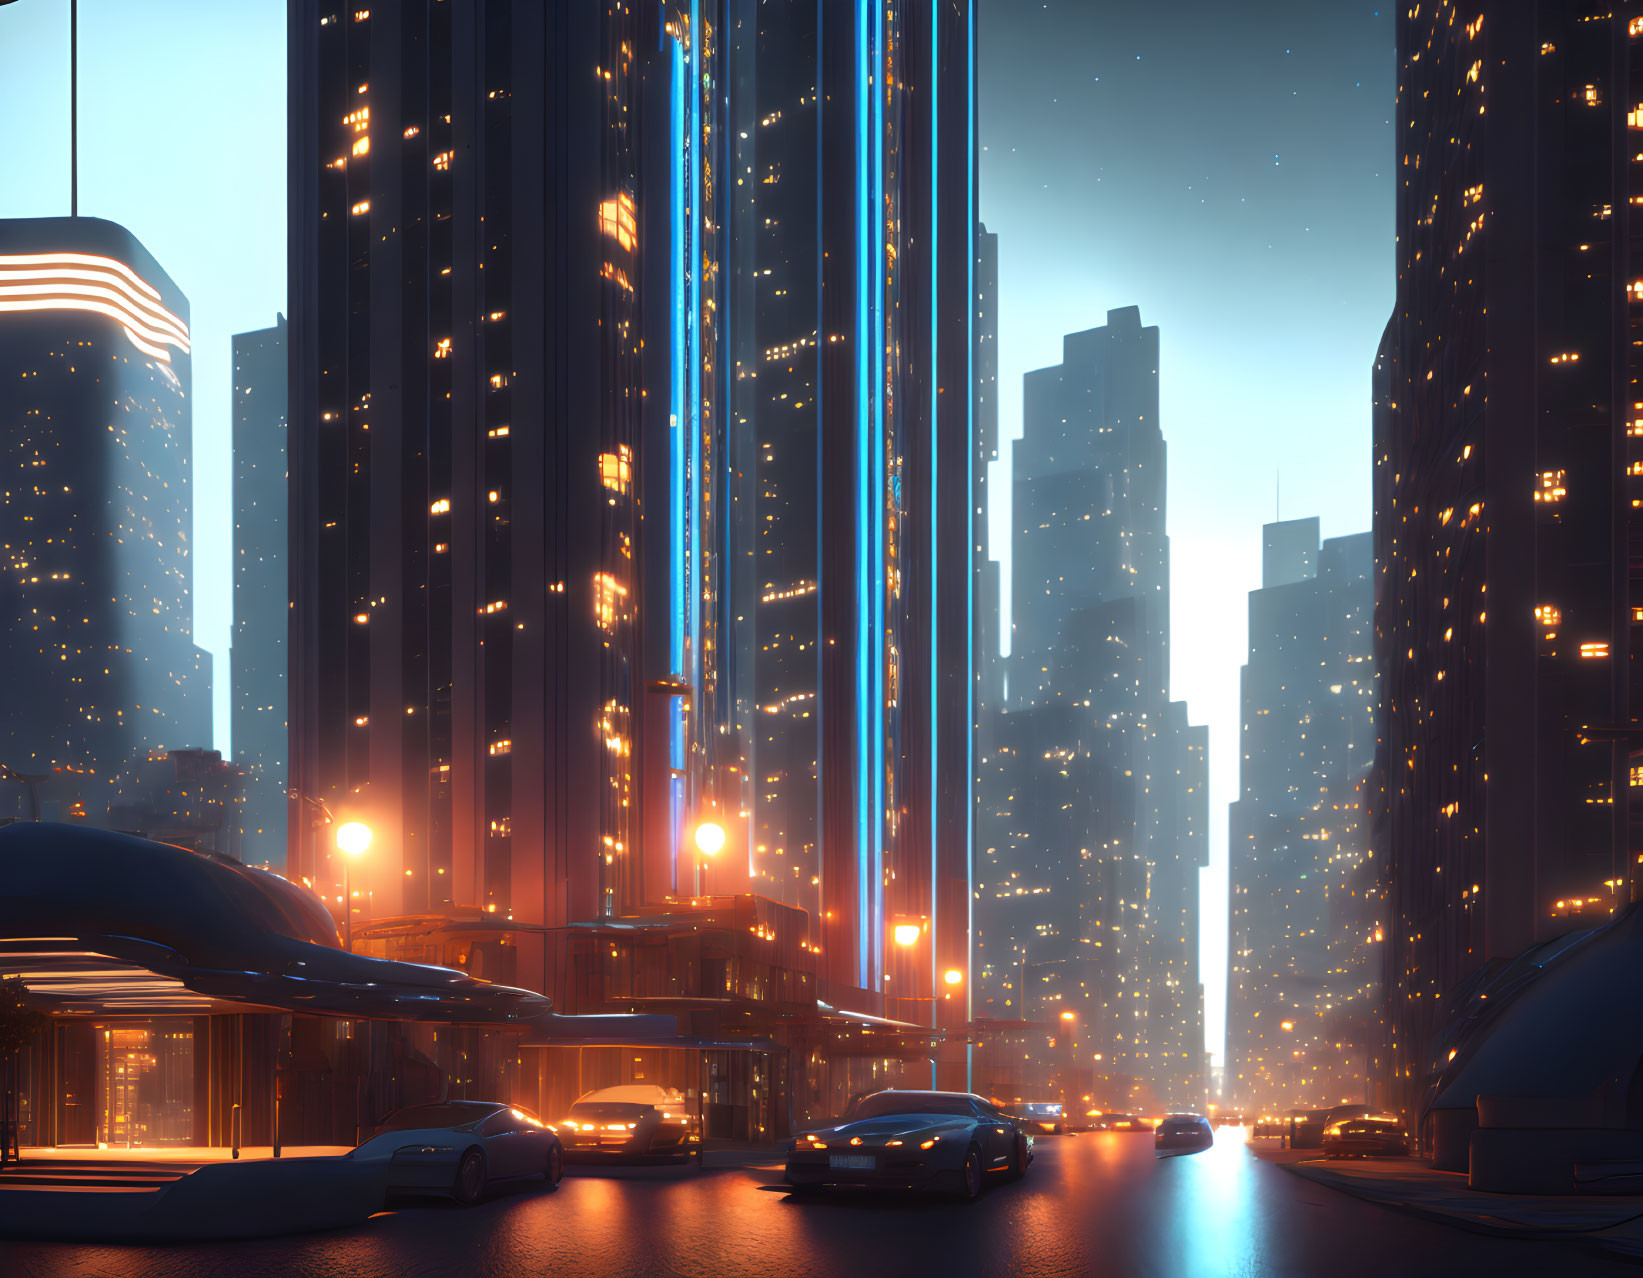 Futuristic cityscape at dusk with illuminated skyscrapers and neon lights